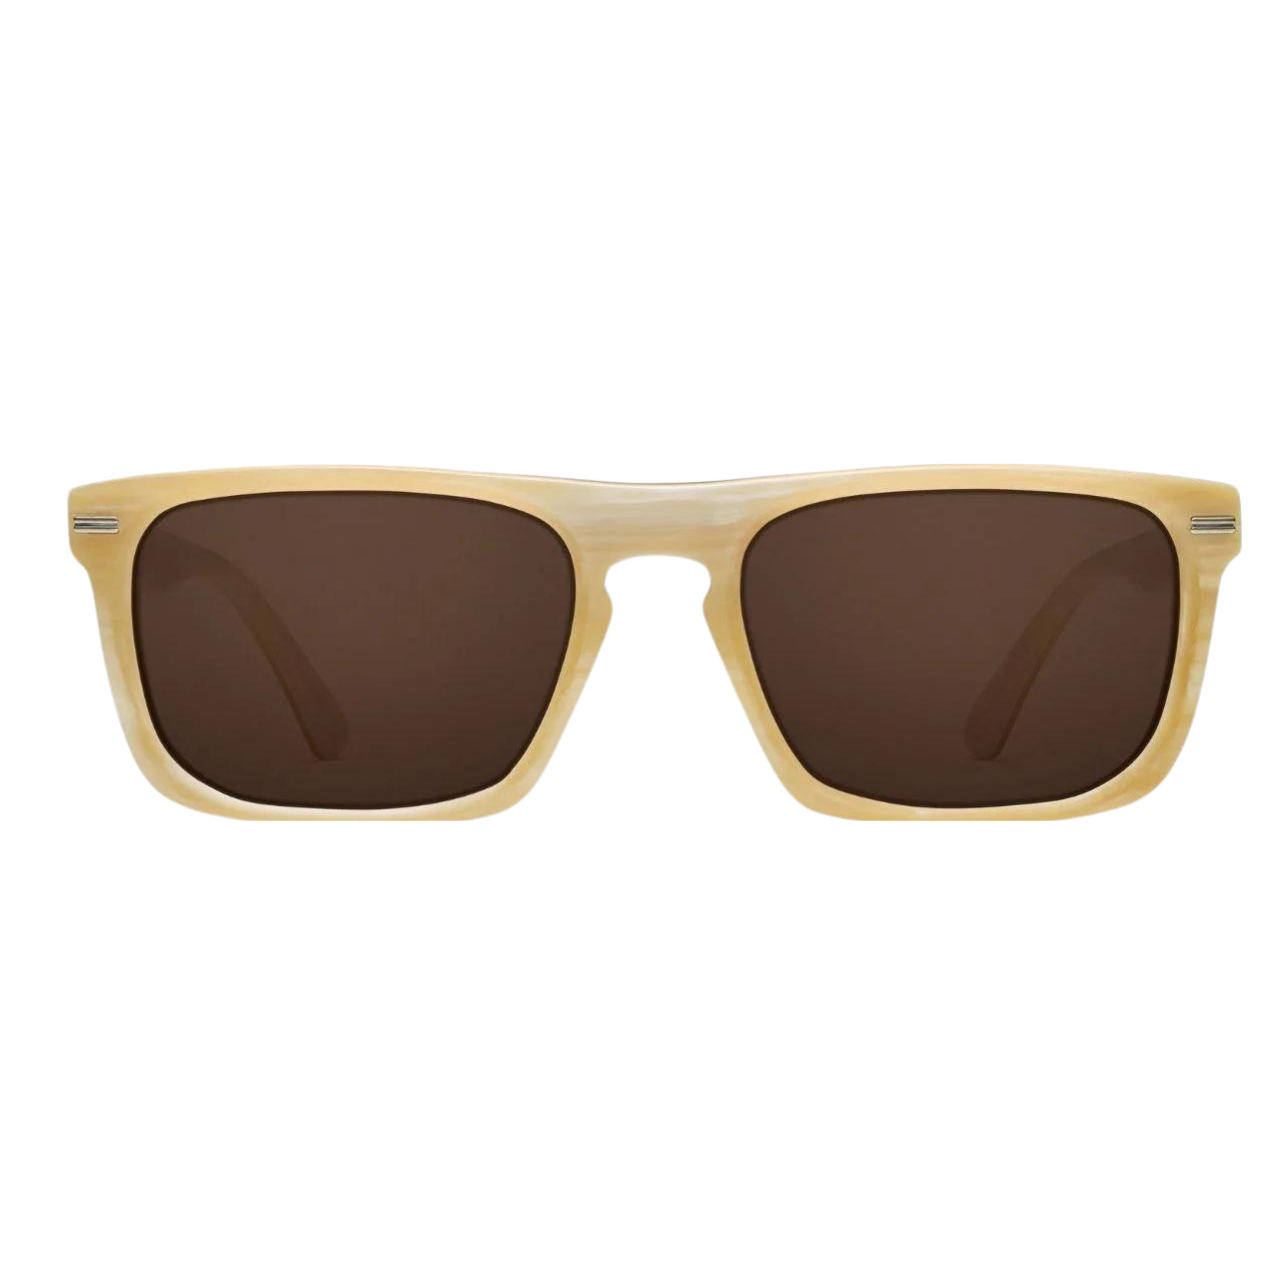 Morgenthal Frederics sunglasses in shiny horn colorway